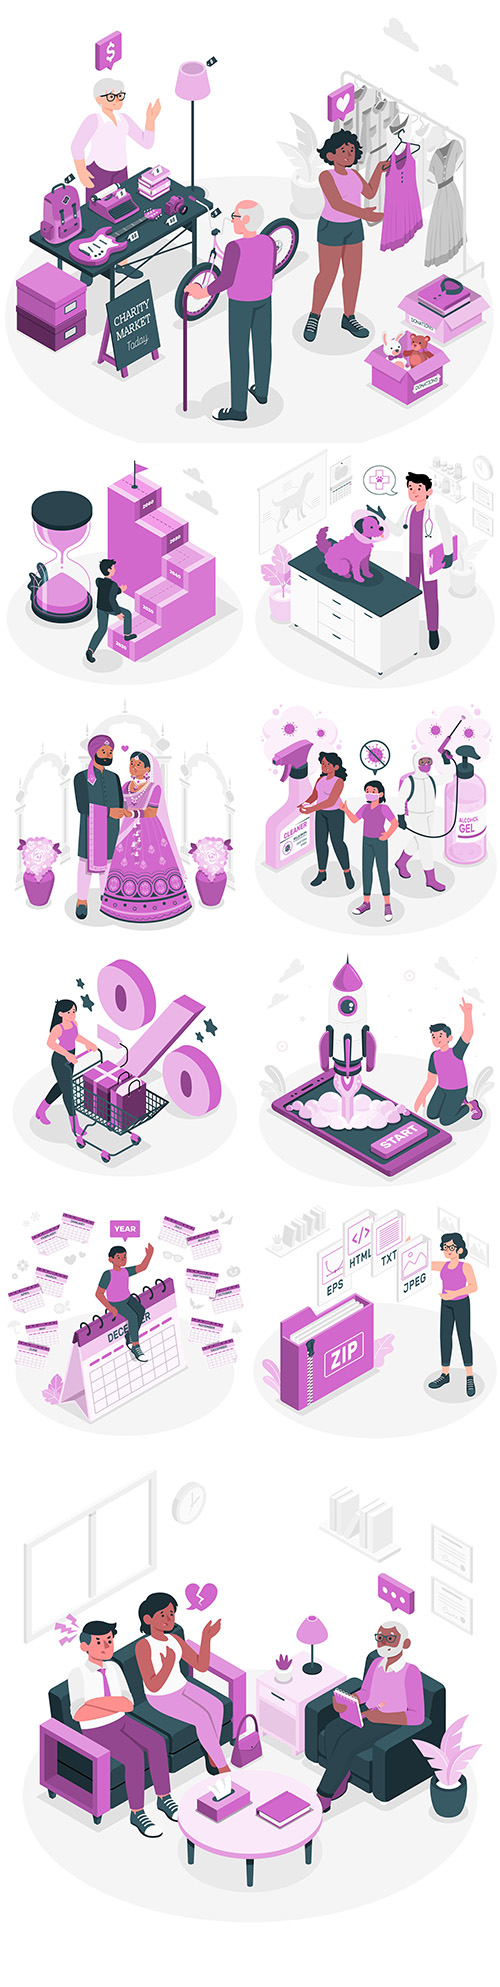 People of different professions and lifestyle isometric illustrations 5
